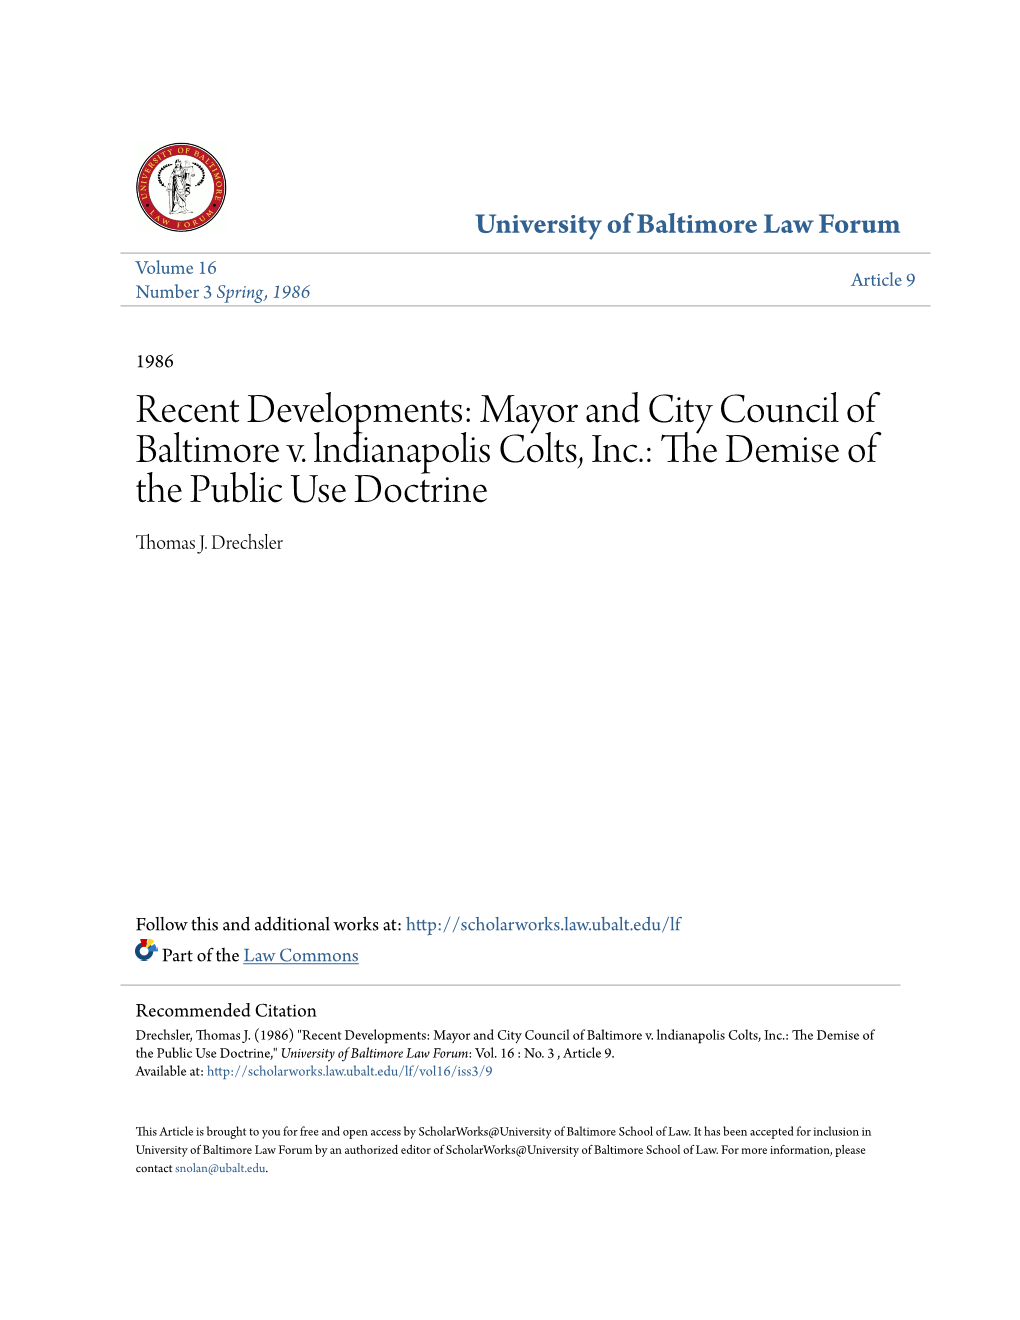 Mayor and City Council of Baltimore V. Lndianapolis Colts, Inc.: the Ed Mise of the Public Use Doctrine Thomas J